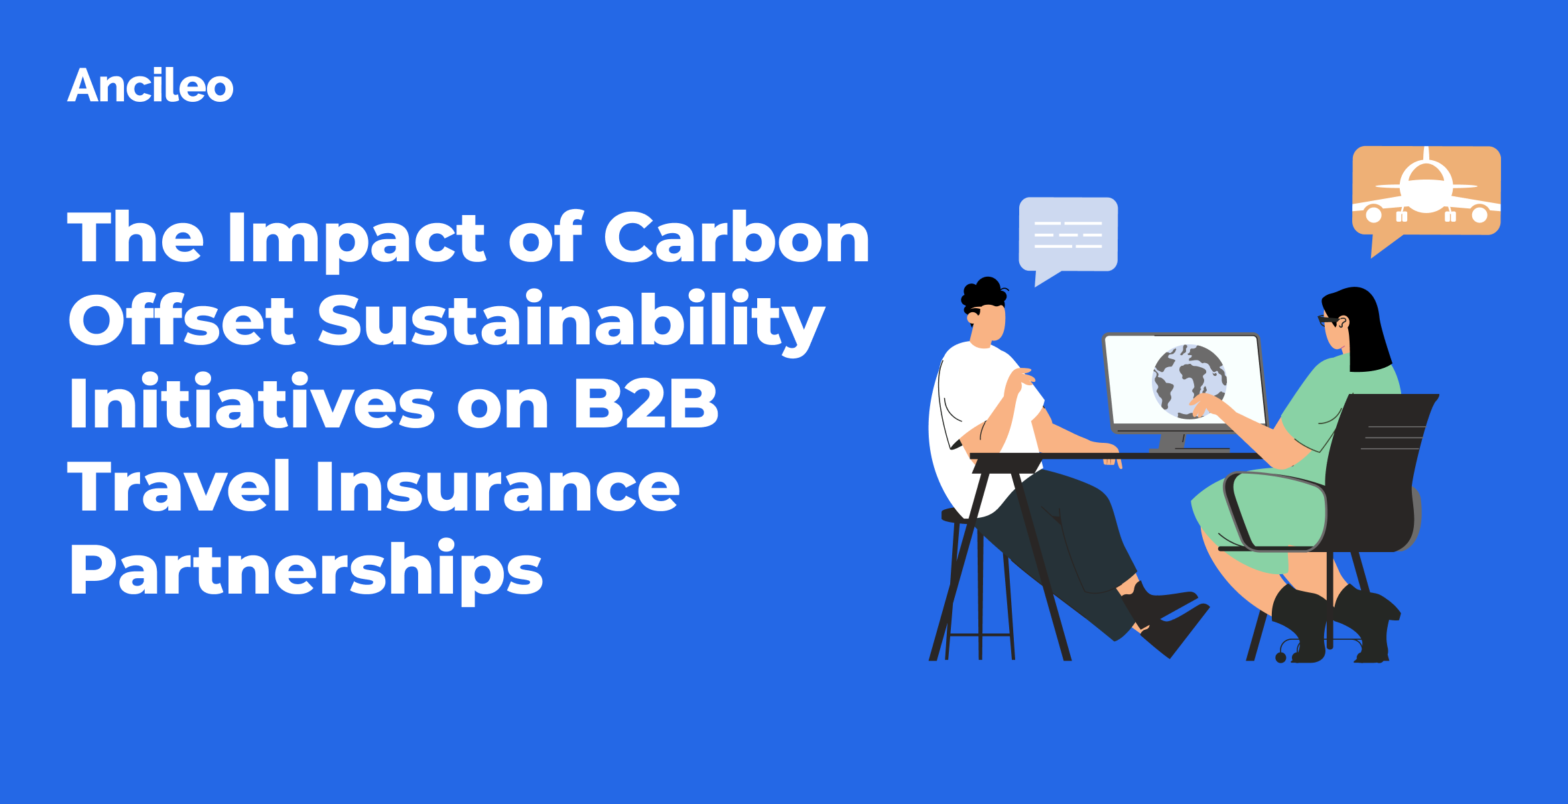 The Impact of Carbon Offset Sustainability Initiatives on B2B Travel Insurance Partnerships